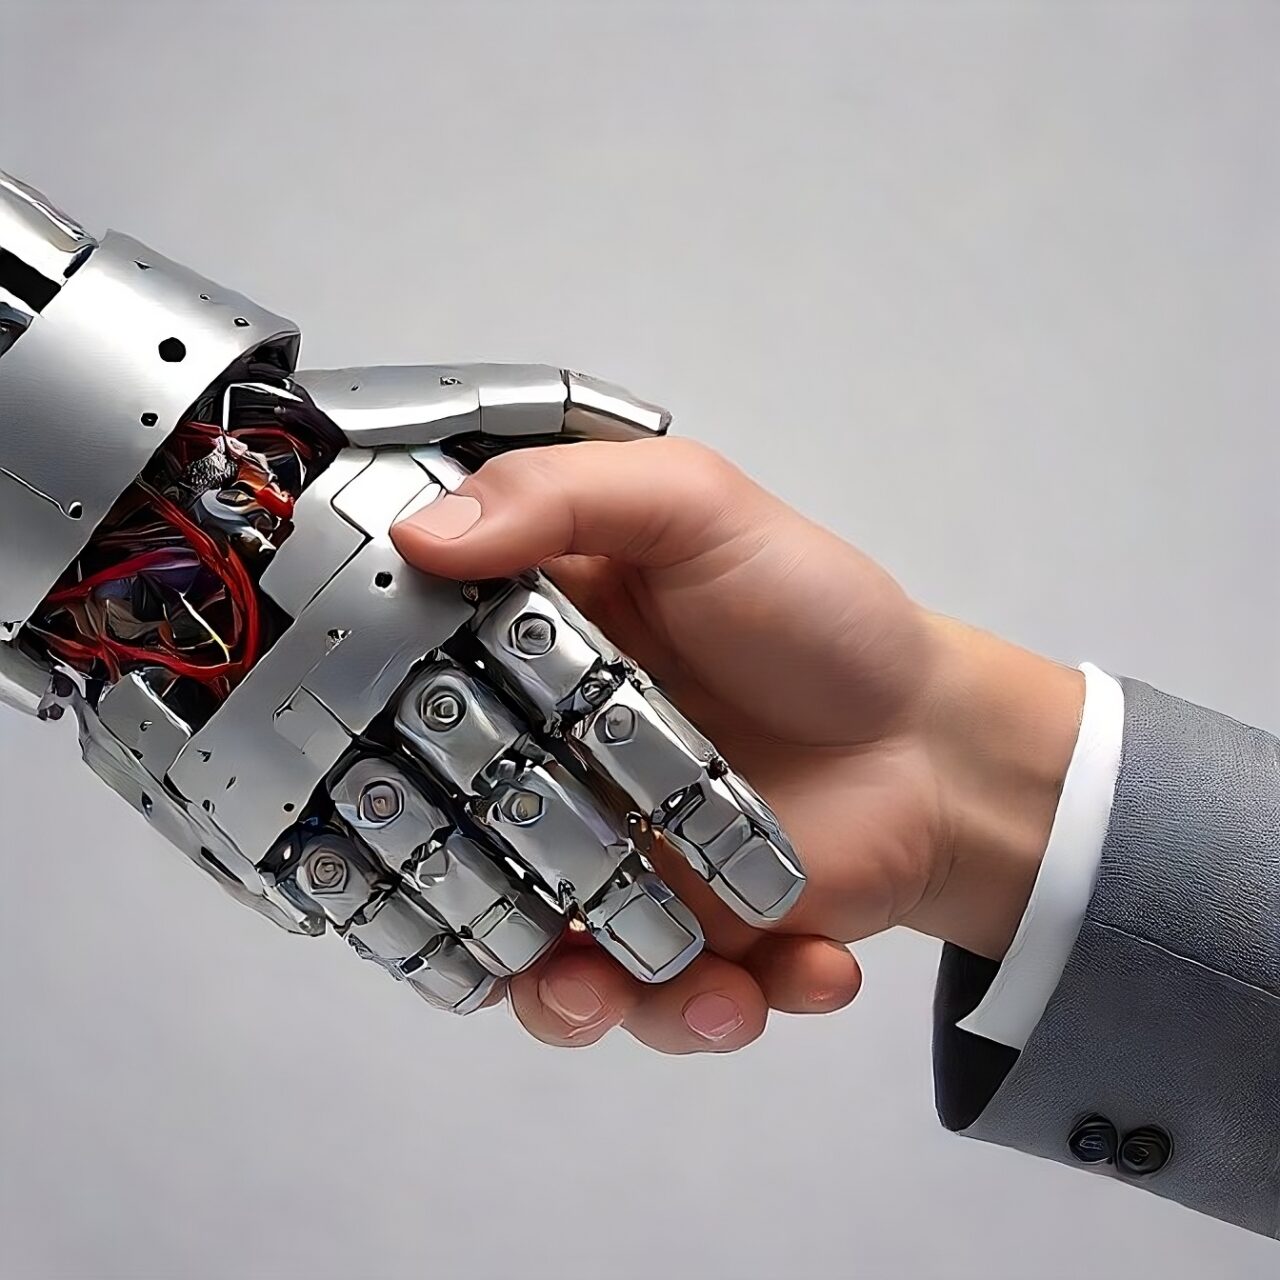 A robot hand shaking hands with a man in a suit, symbolizing collaboration between technology and business.